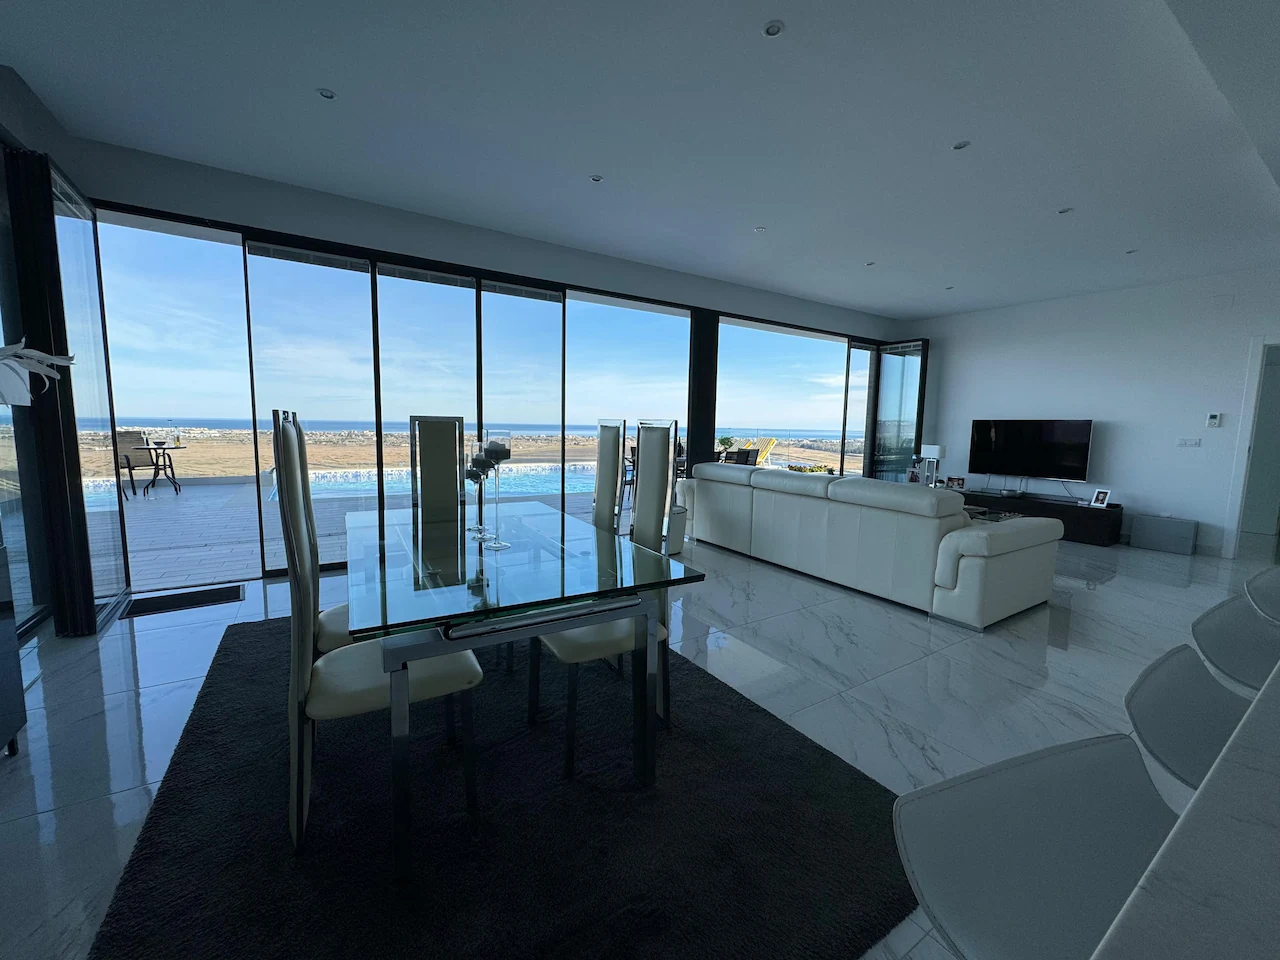 Slimmest ultra slim bifold doors in a living room overlooking the sea, letting lots of natural light in